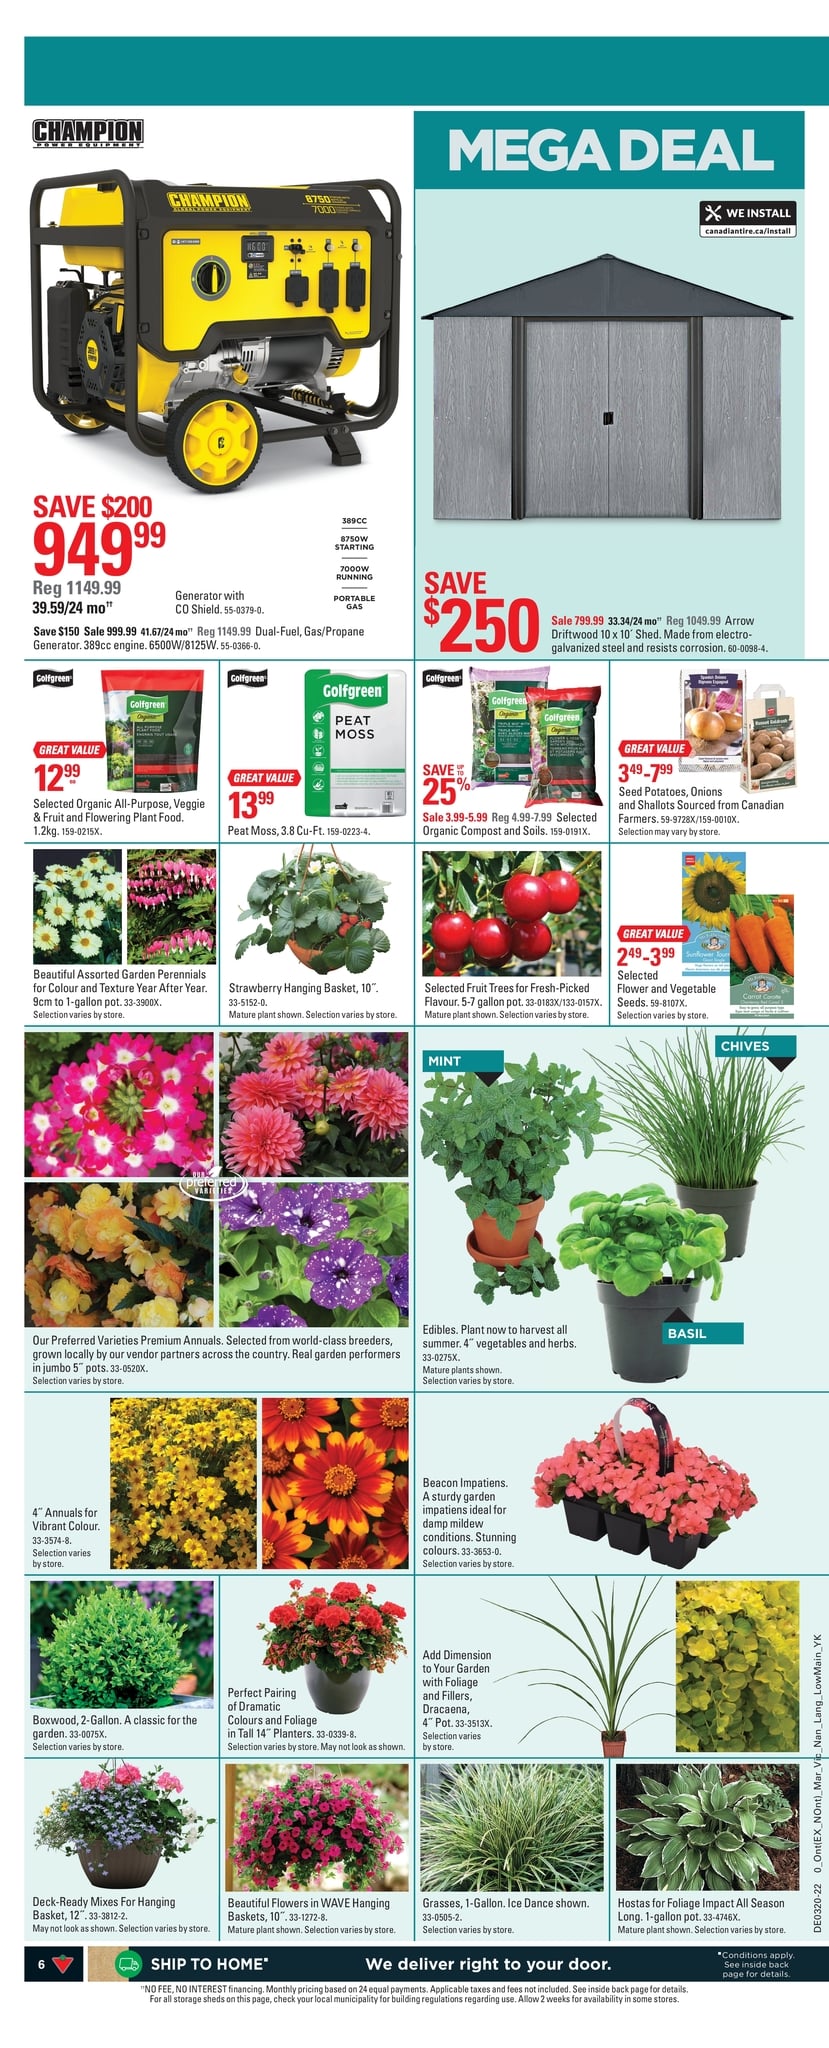 Canadian Tire - Weekly Flyer Specials - Page 6